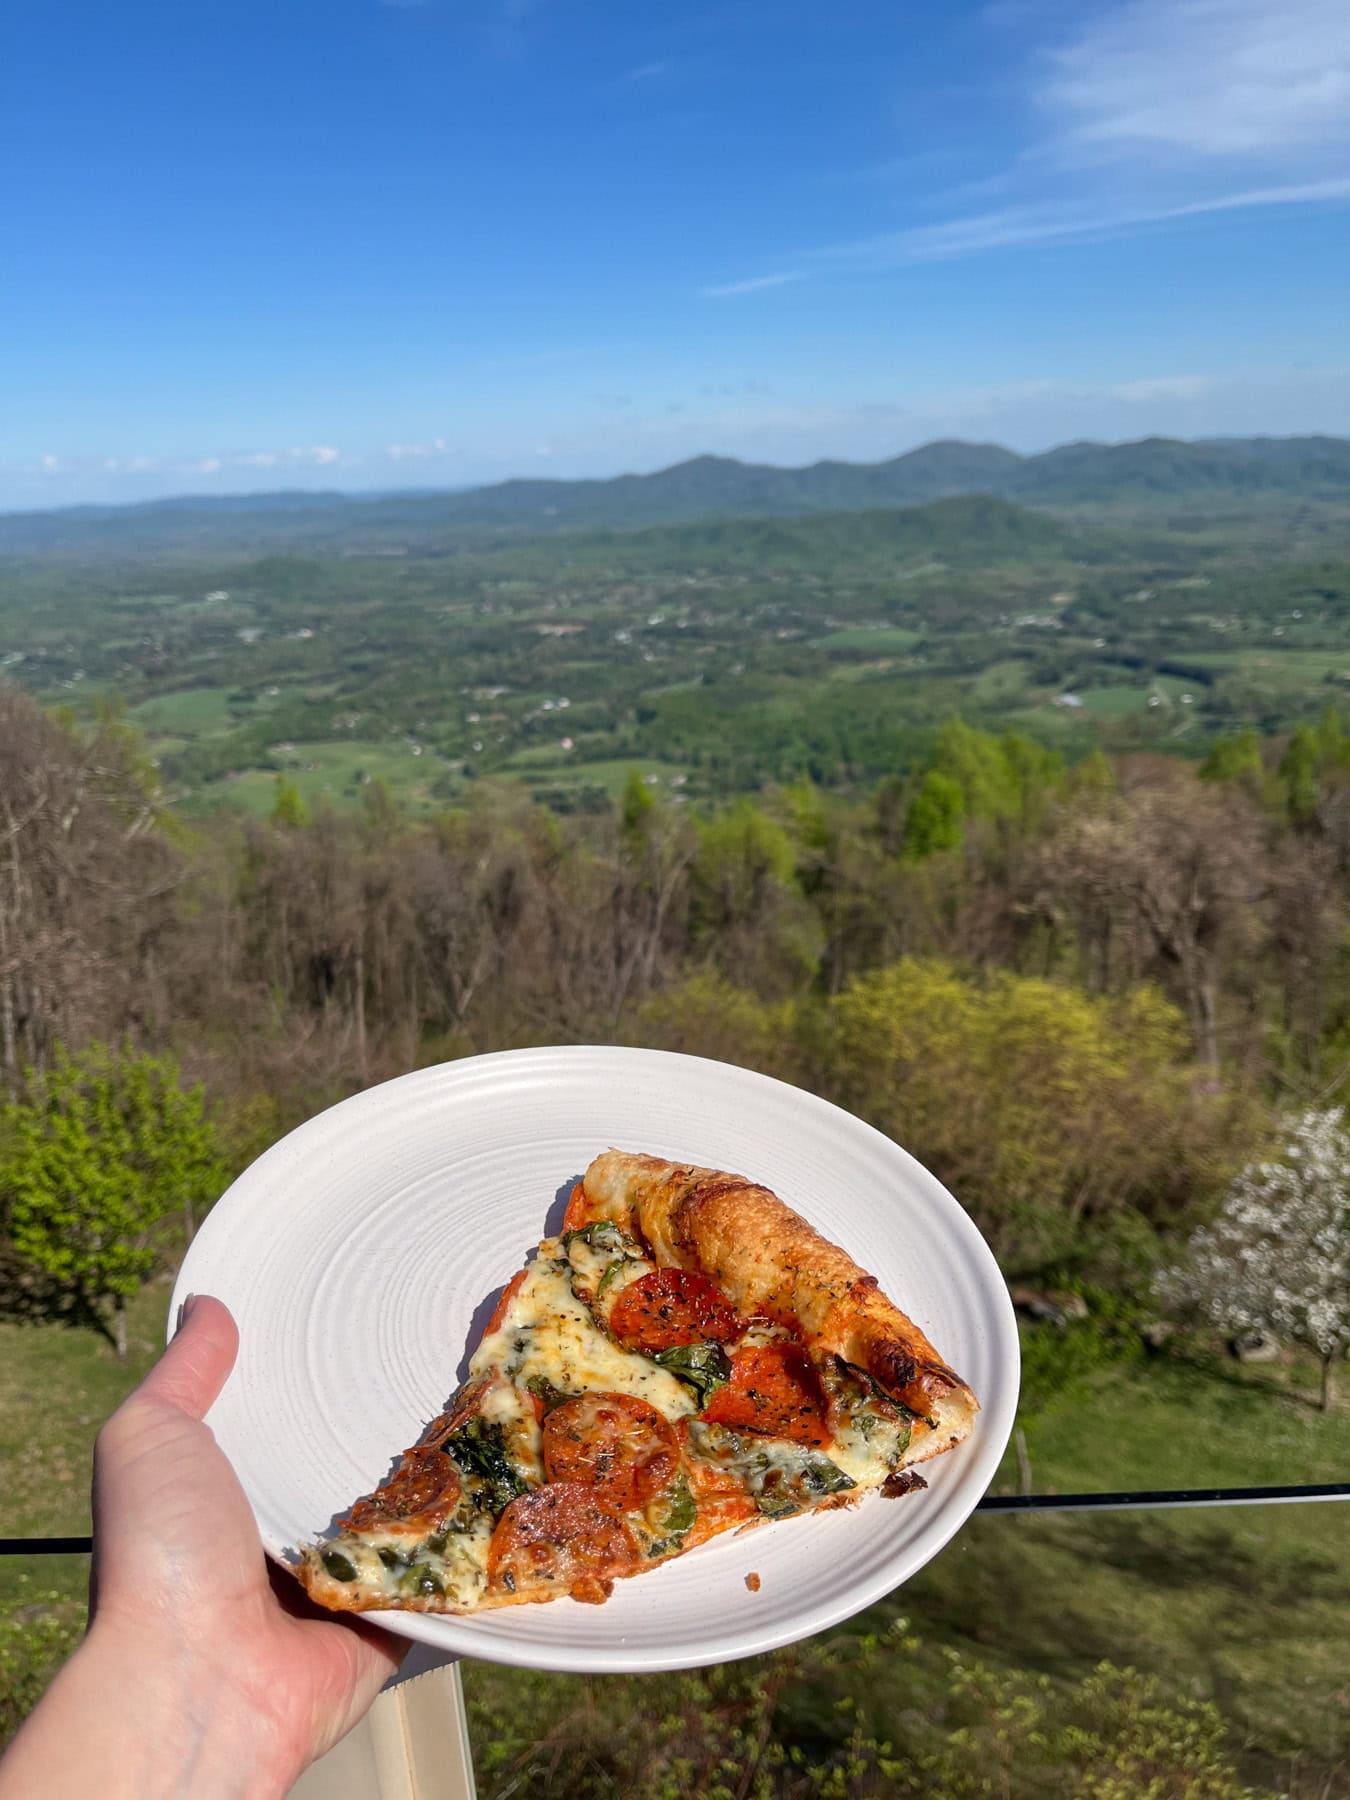 crozet pizza slice with a view of shenandoah